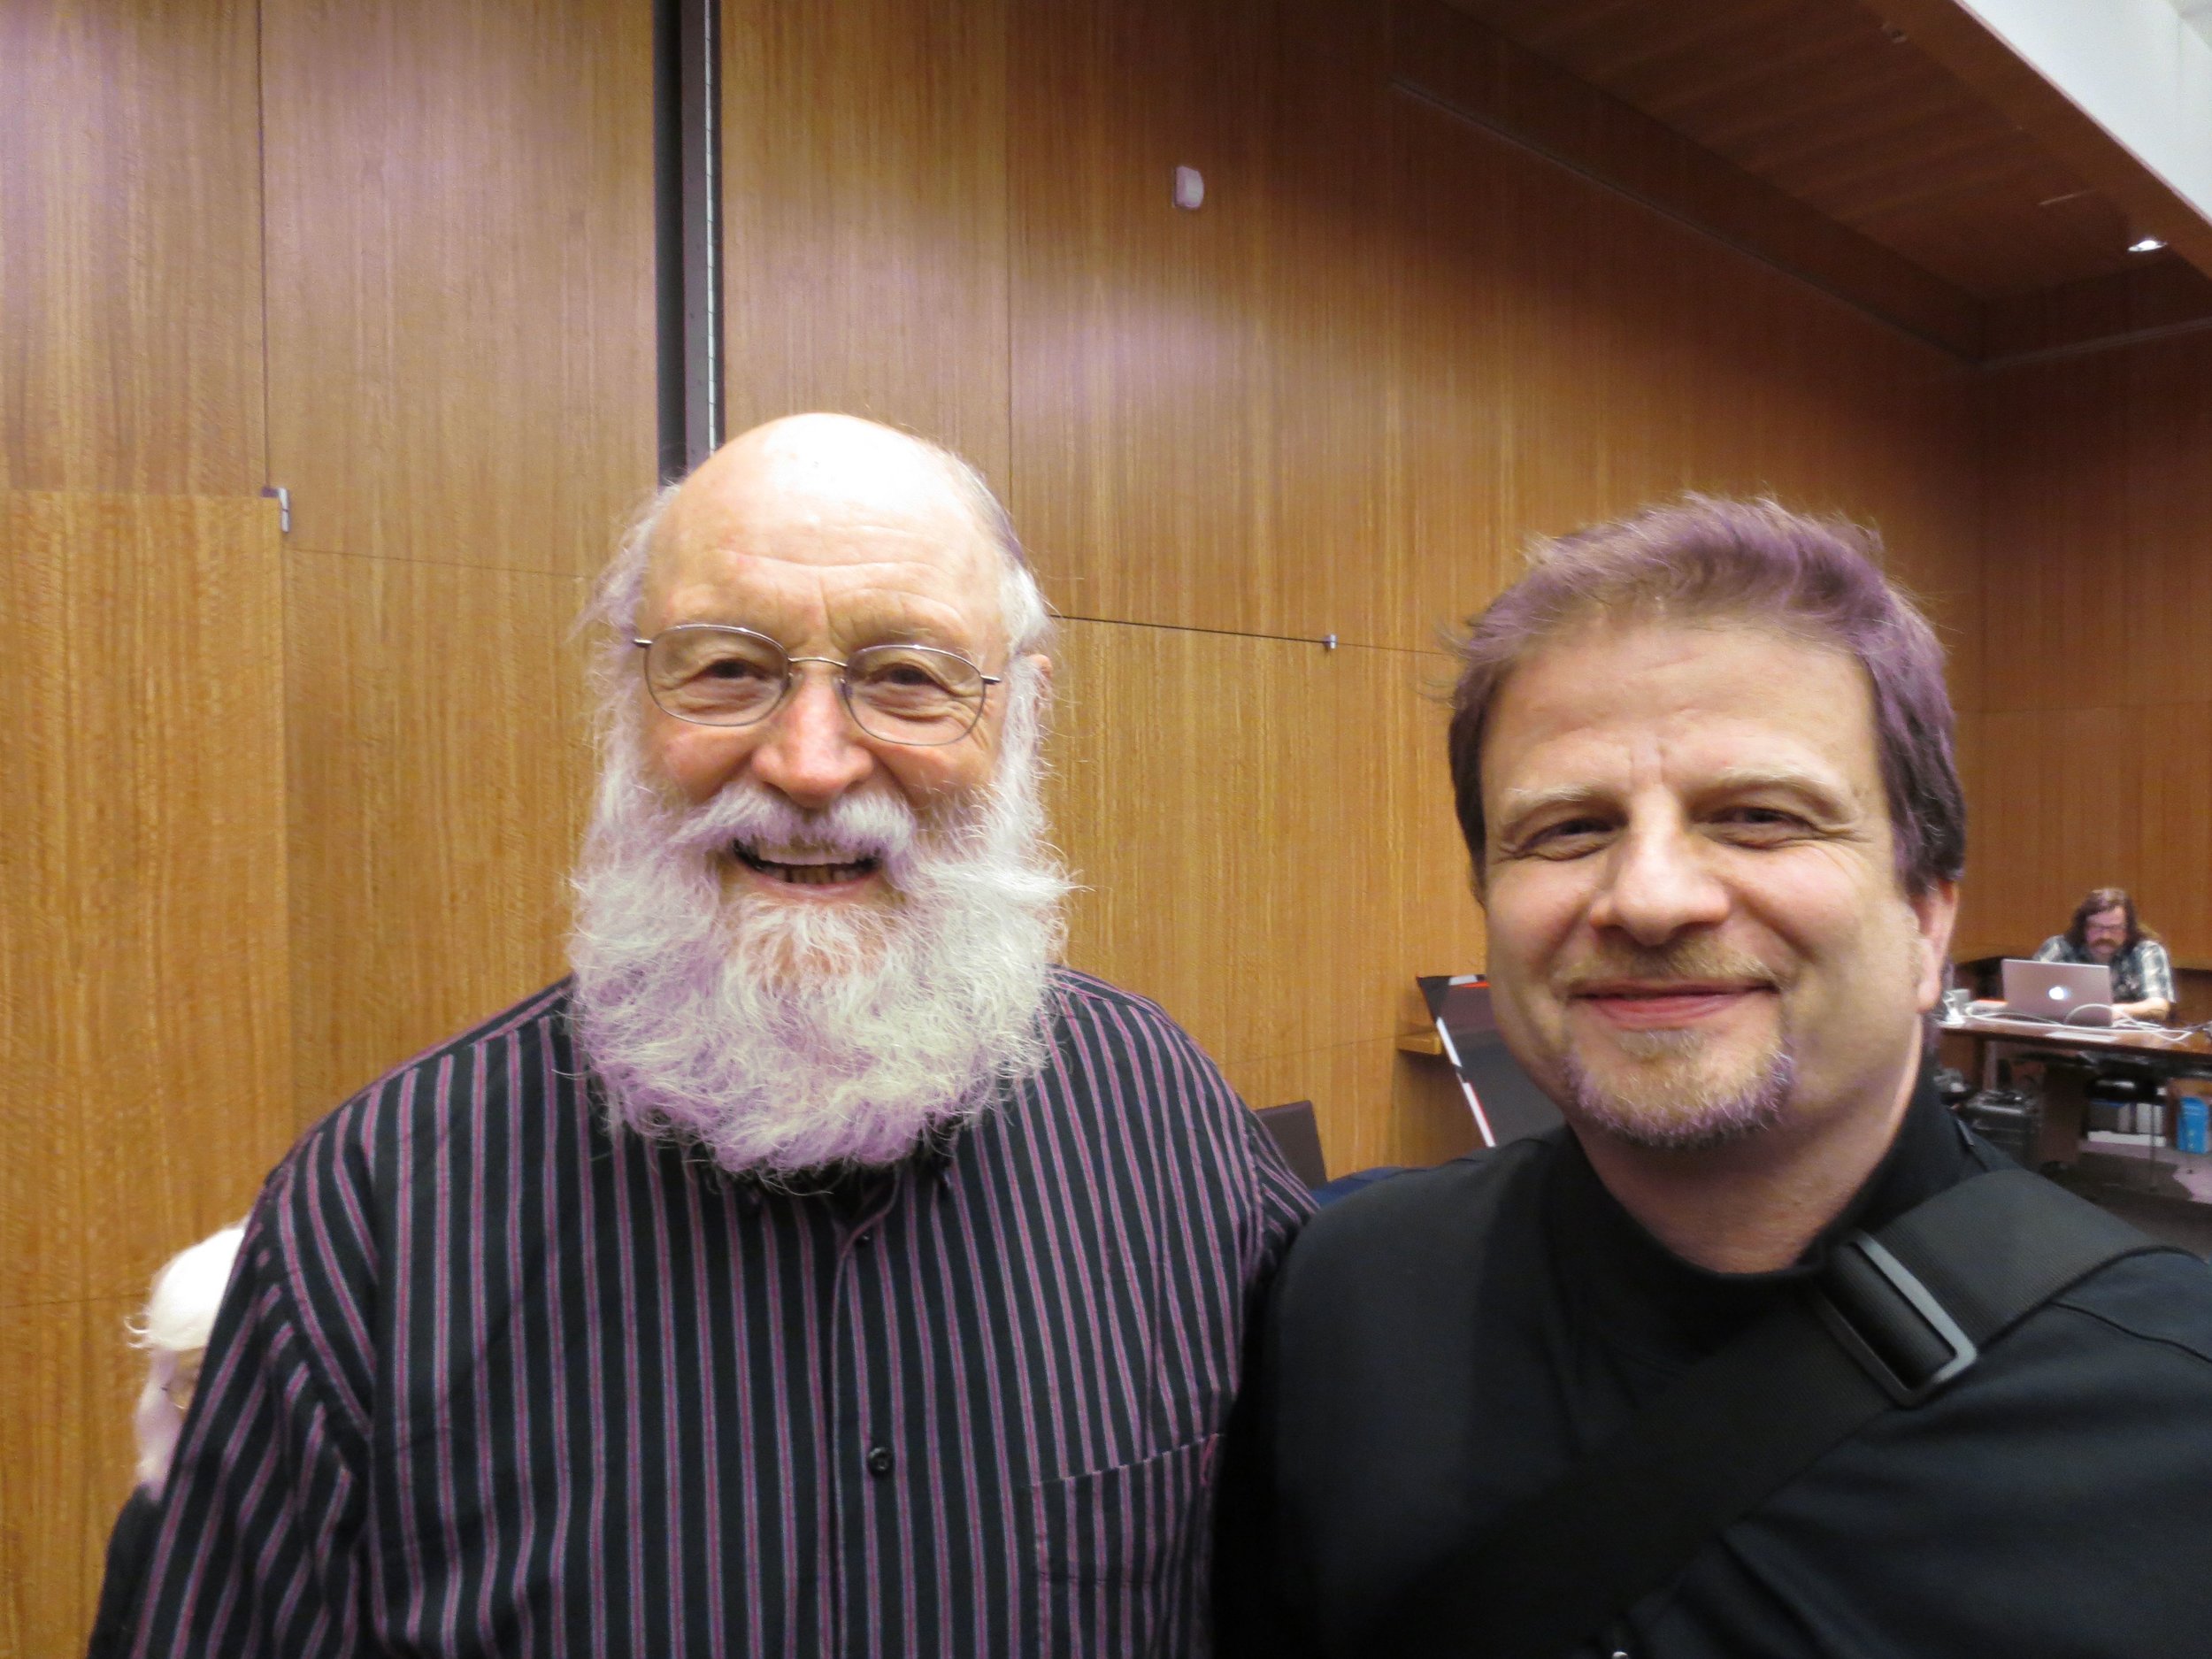  An honor to play "In C" with Terry Riley 